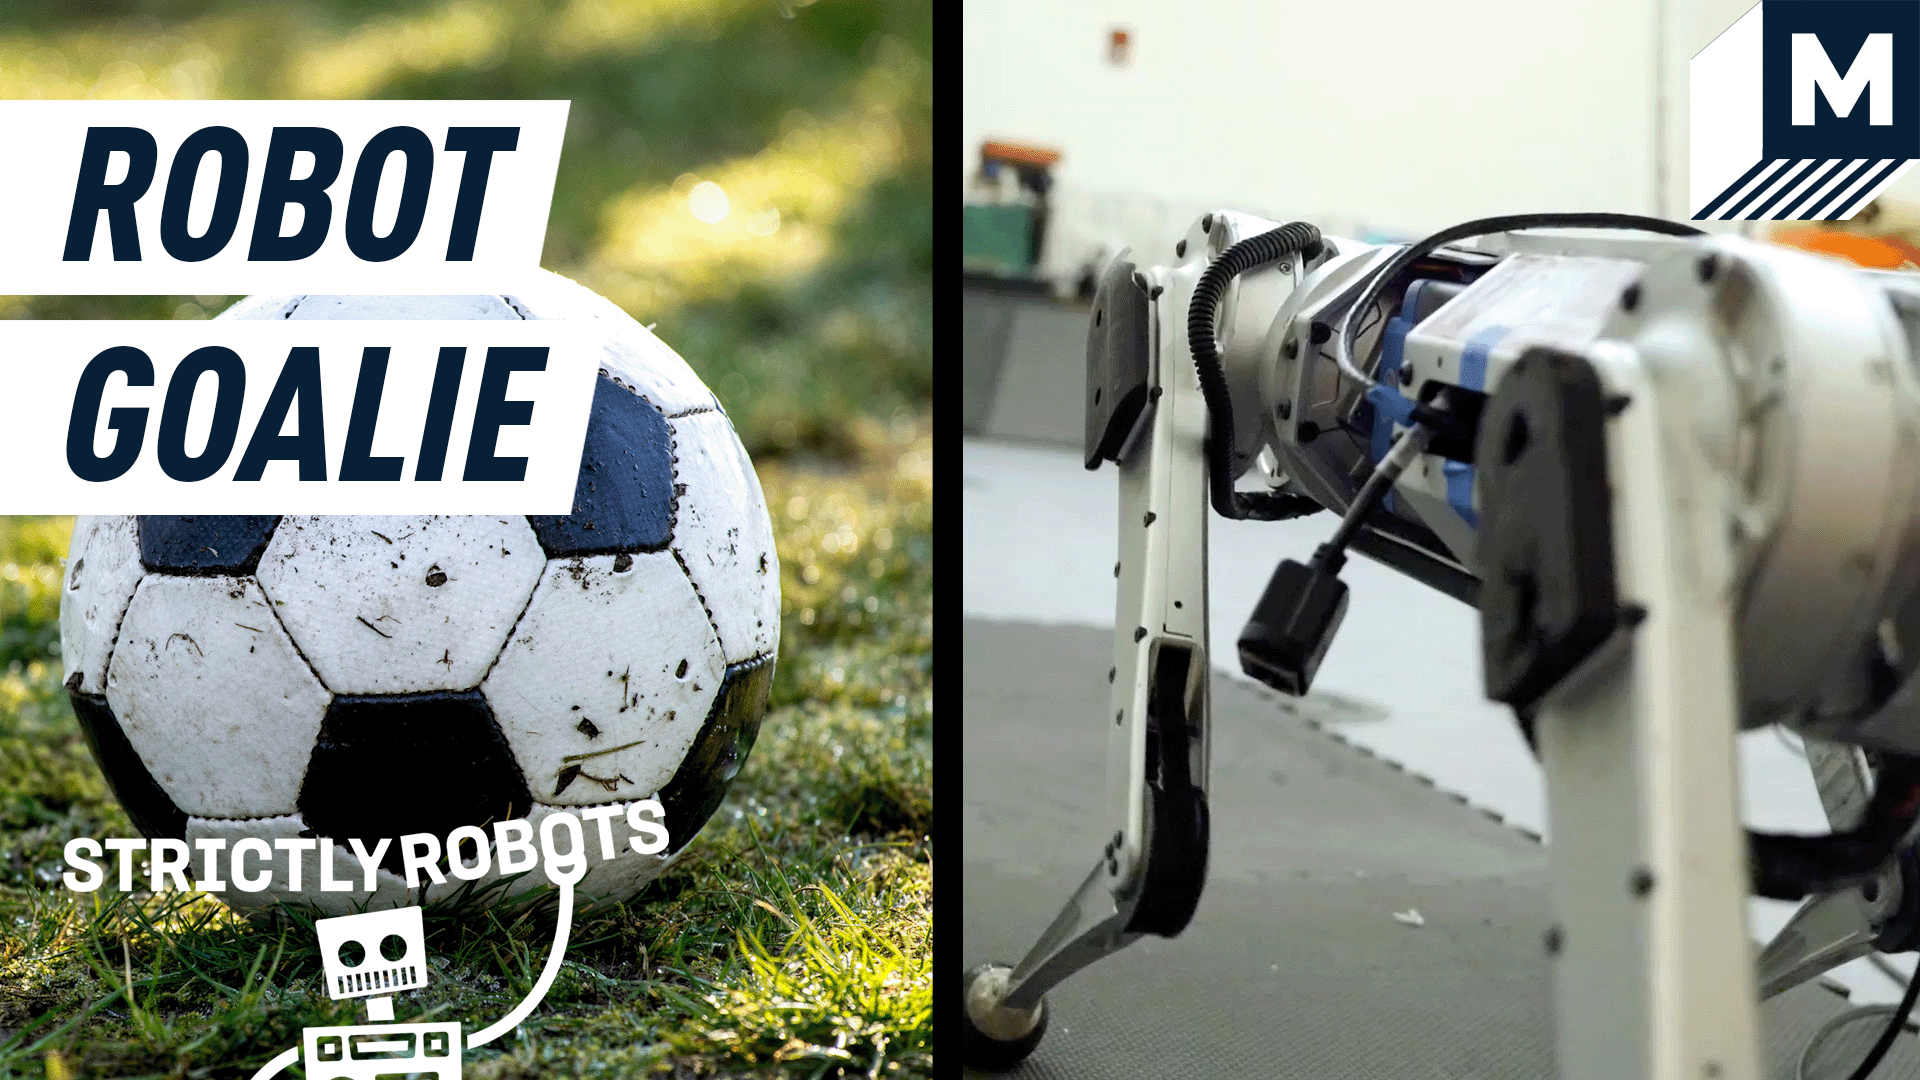 A side by side image of a soccer ball and a Mini Cheetah robot